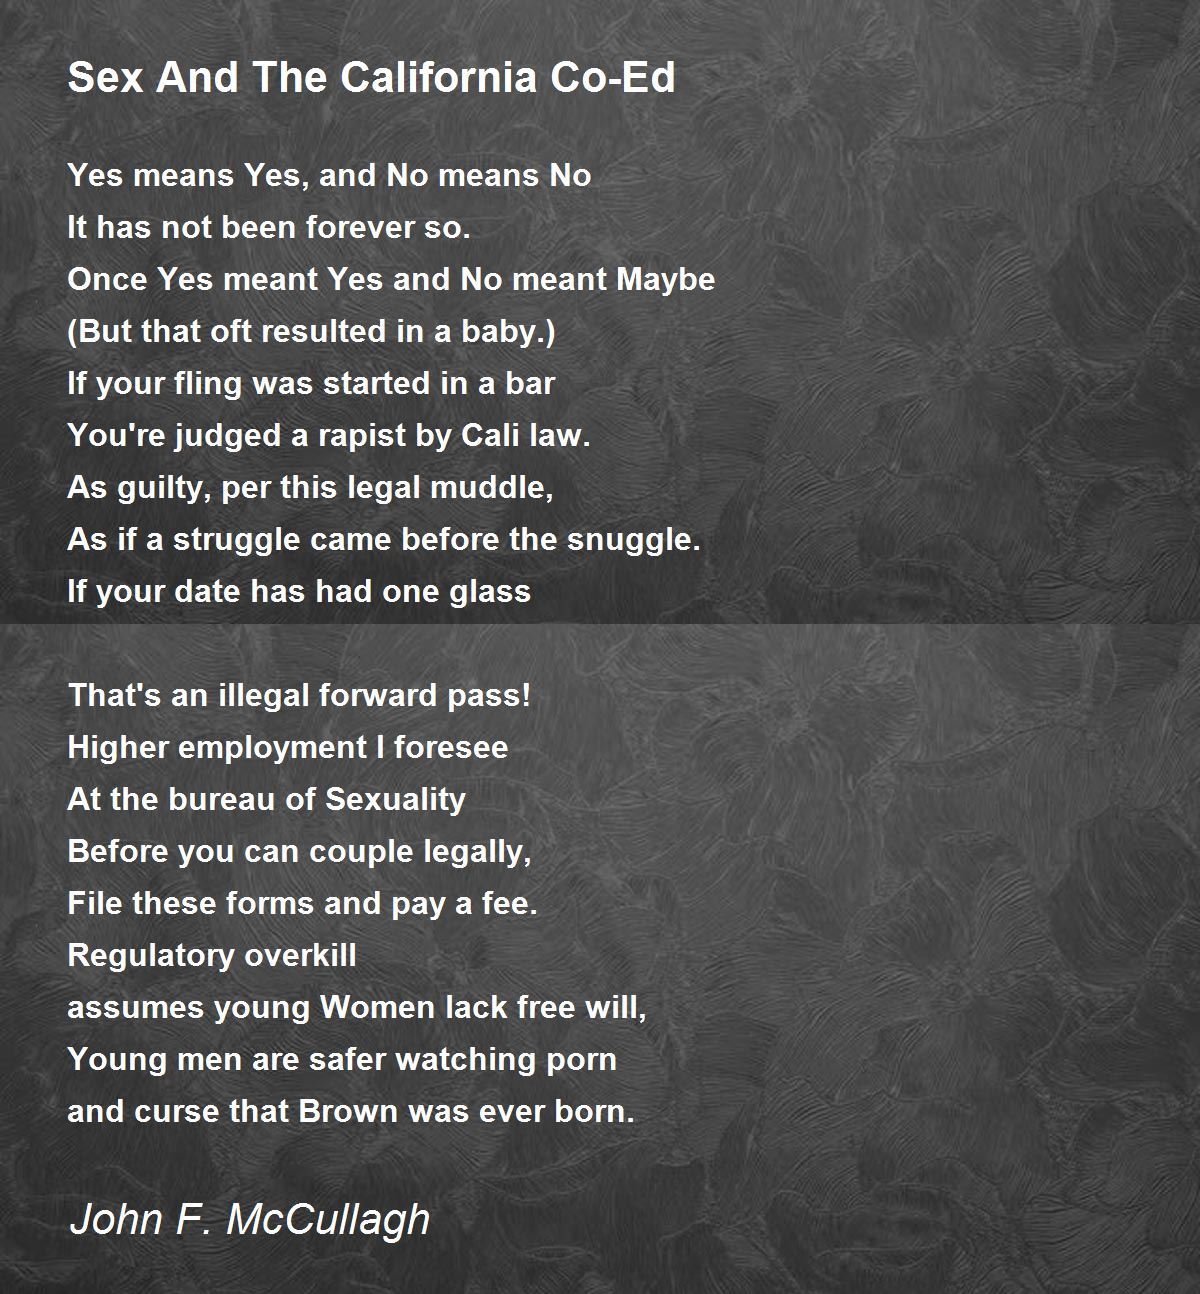 Black and sex in Cali